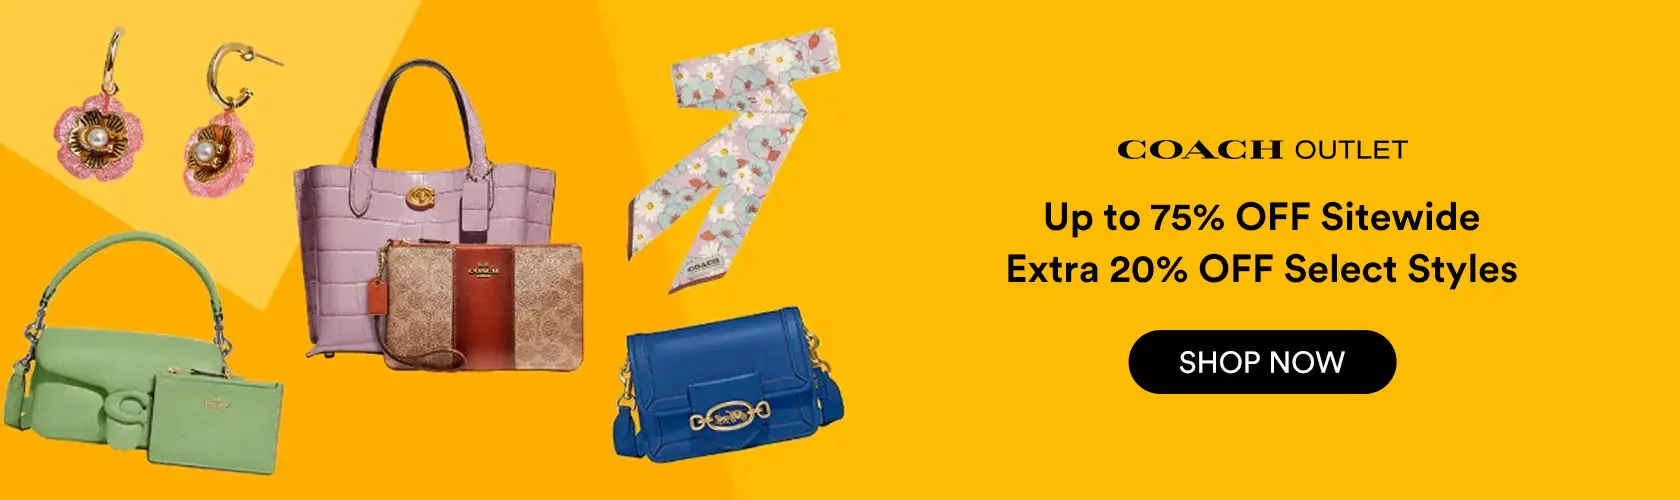 Coach Outlet: Up to 75% OFF Sitewide + Extra 20% OFF Select Styles